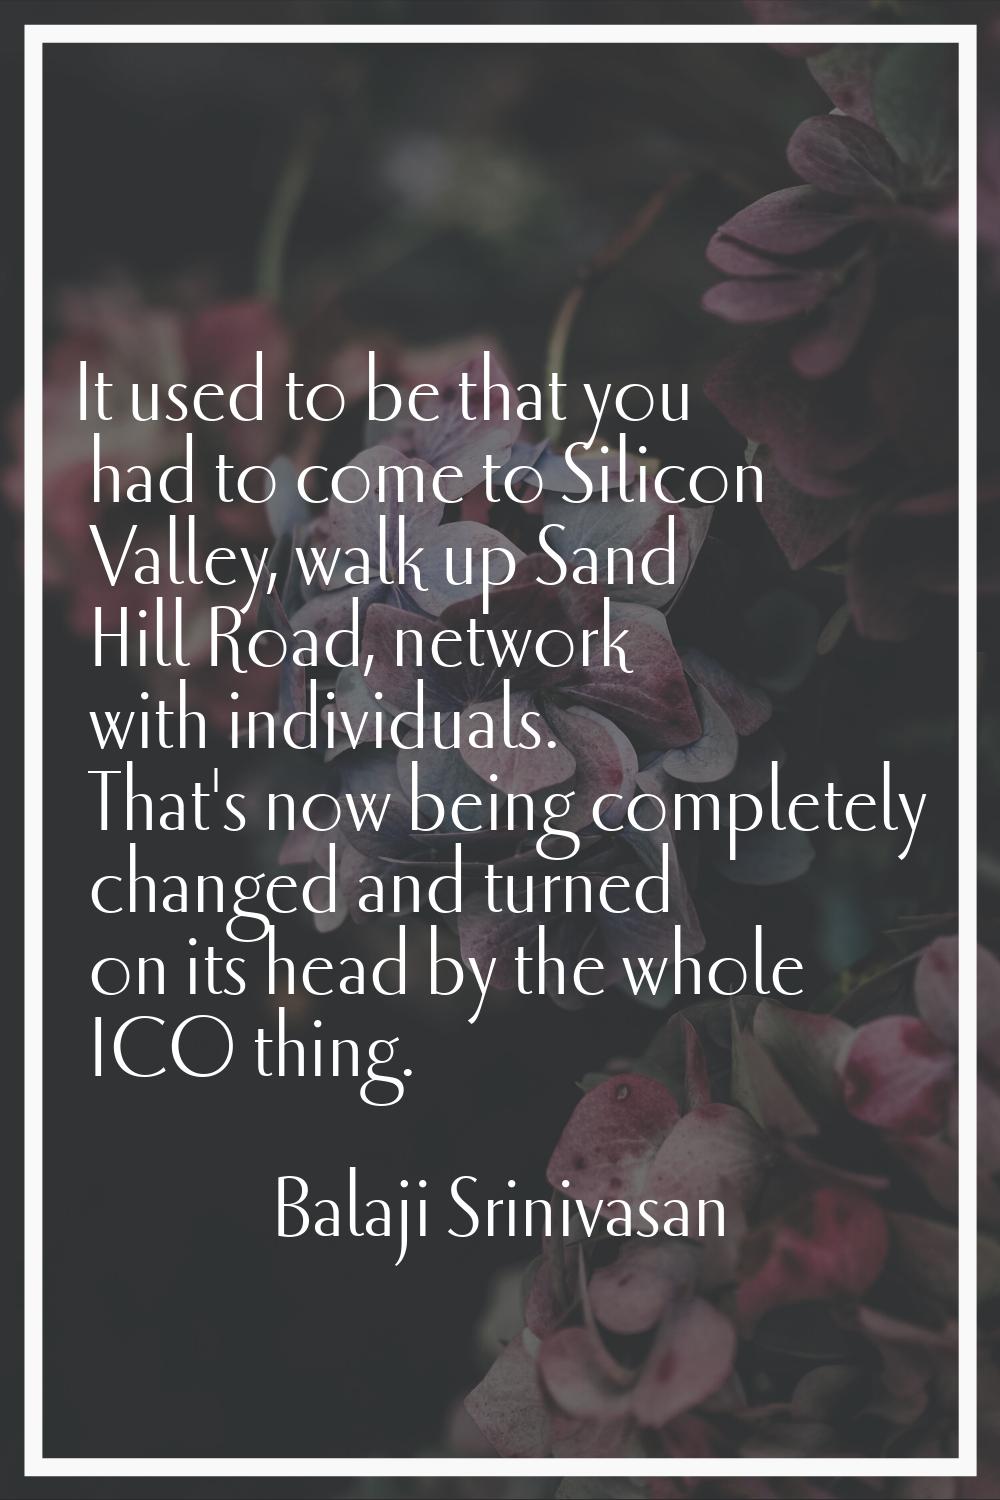 It used to be that you had to come to Silicon Valley, walk up Sand Hill Road, network with individu